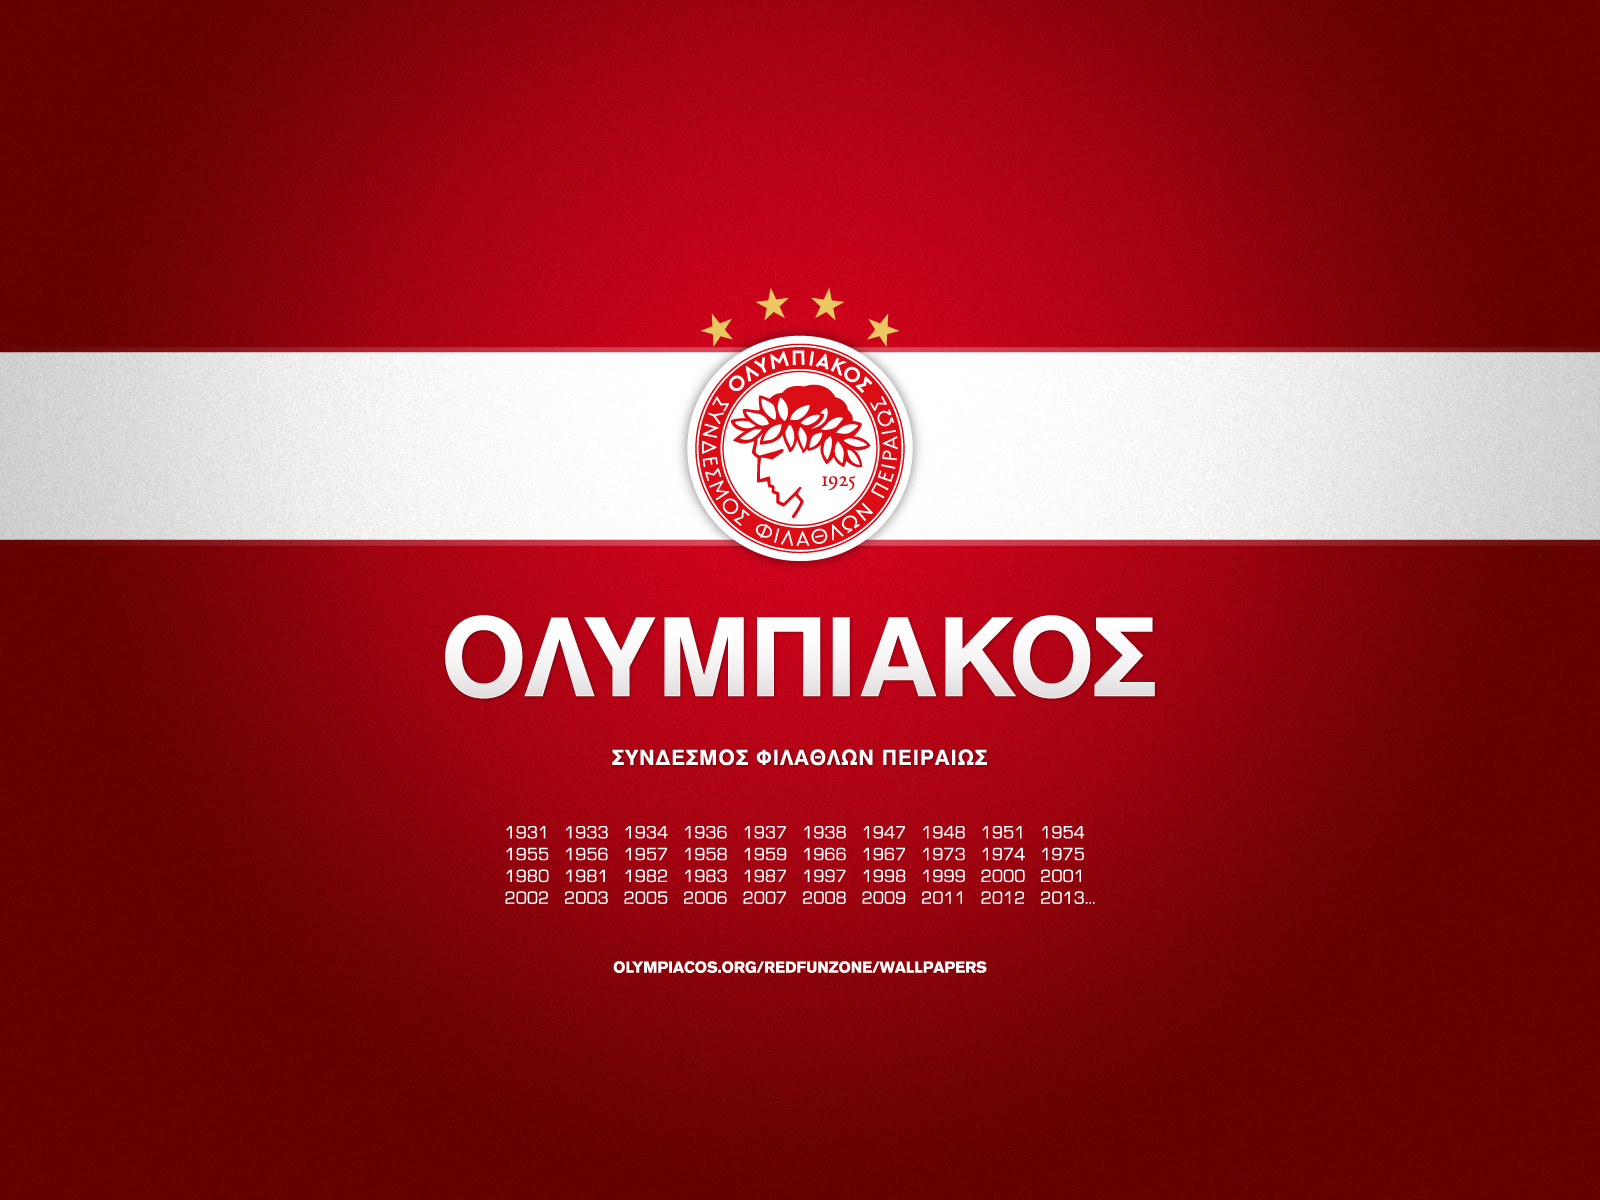 Logo with 4 stars | Olympiacos.org / Official Website of ...